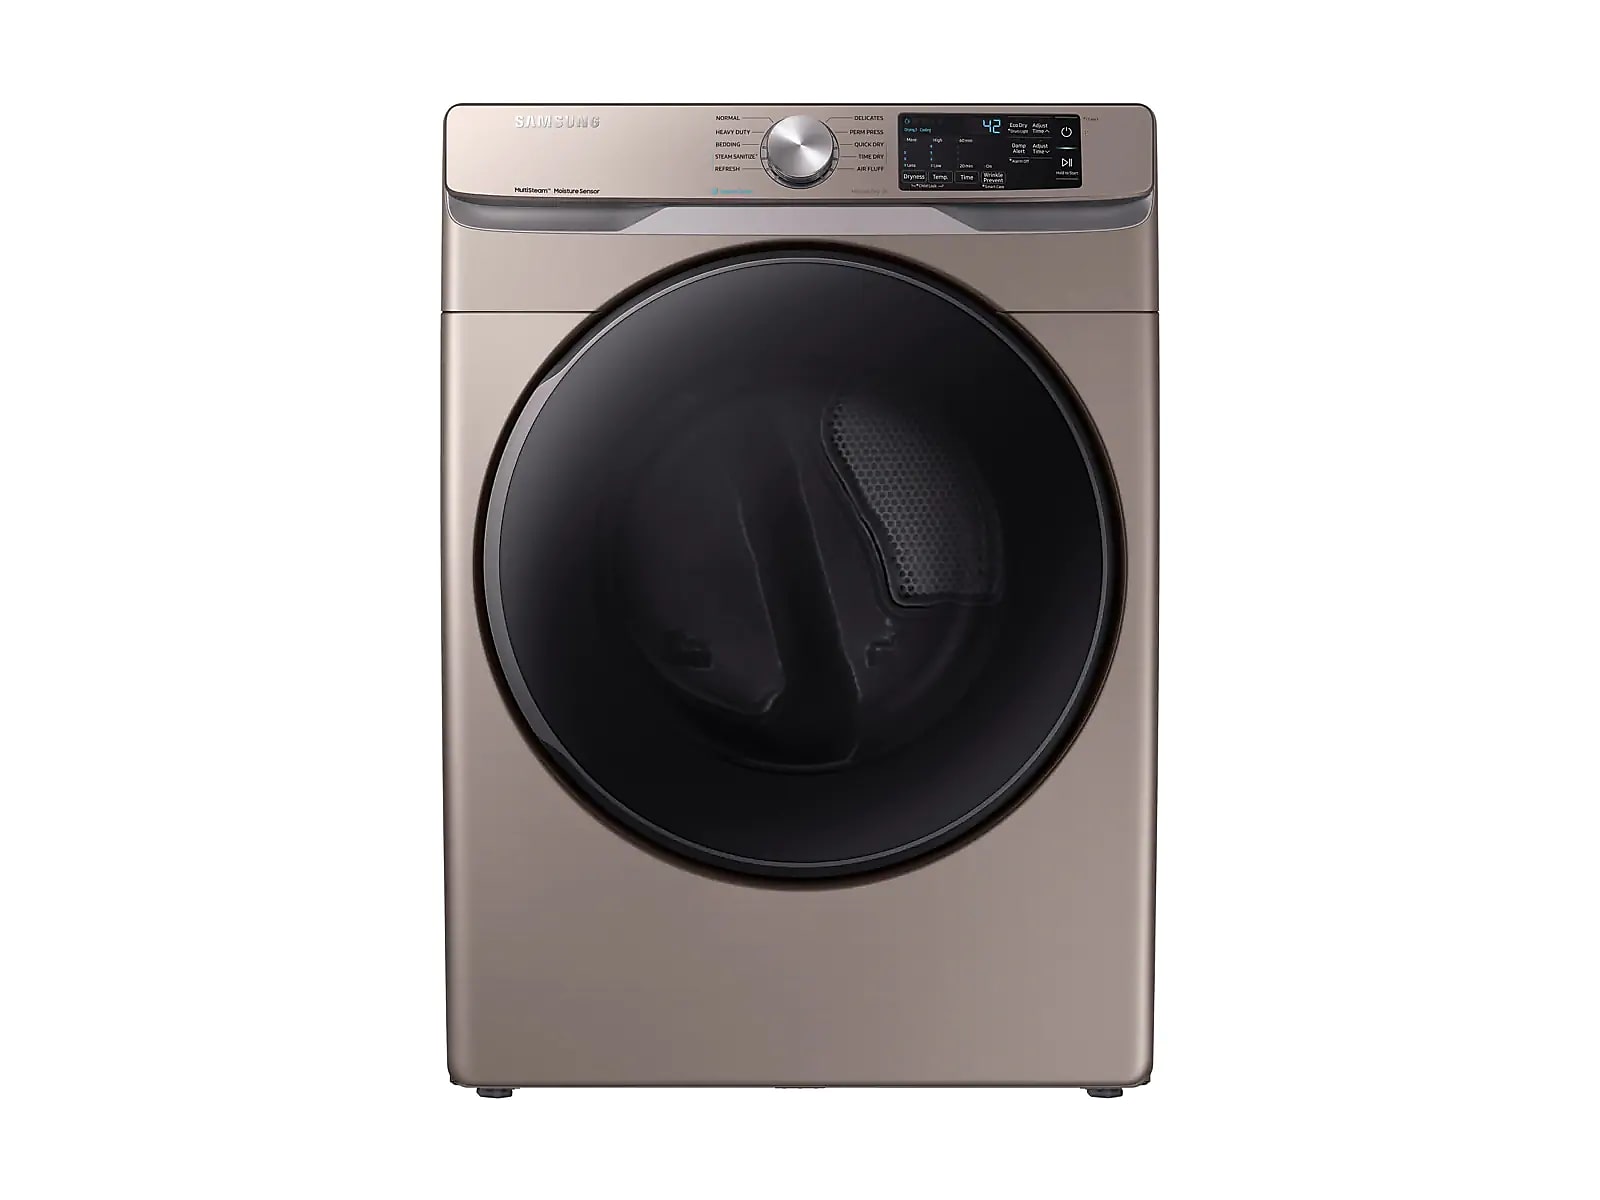 Samsung 7.5 cu. ft. Gas Dryer with Steam Sanitize+ in Champagne(DVG45R6100C/A3)